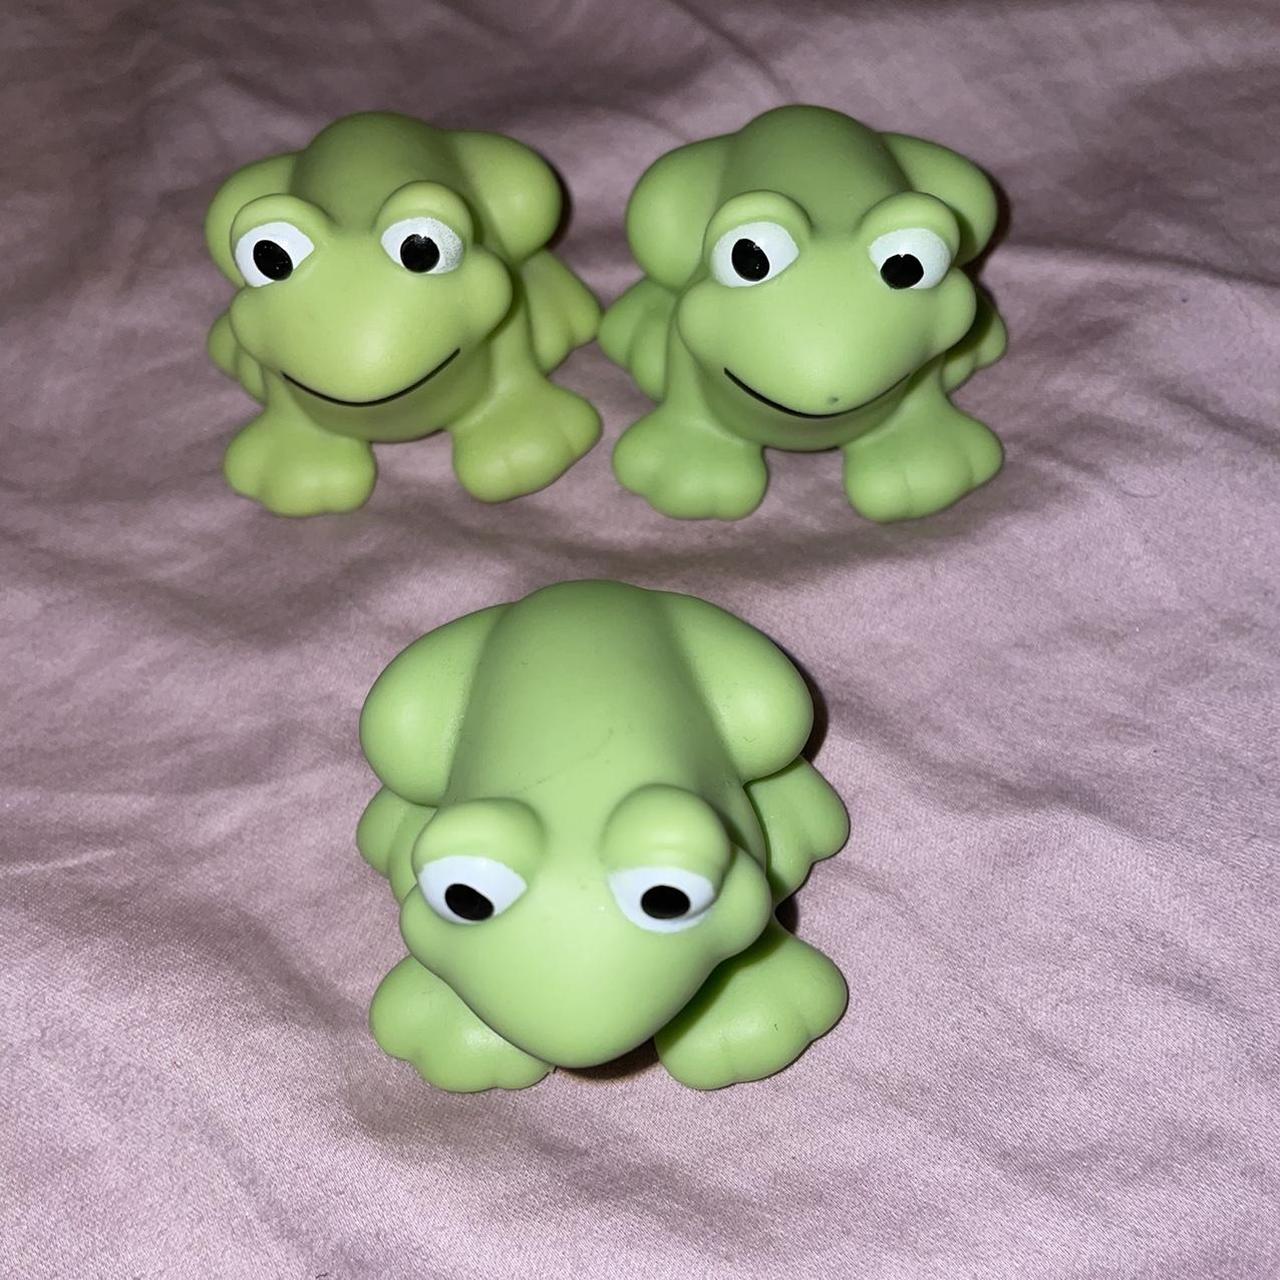 Image of Three plastic toy frogs